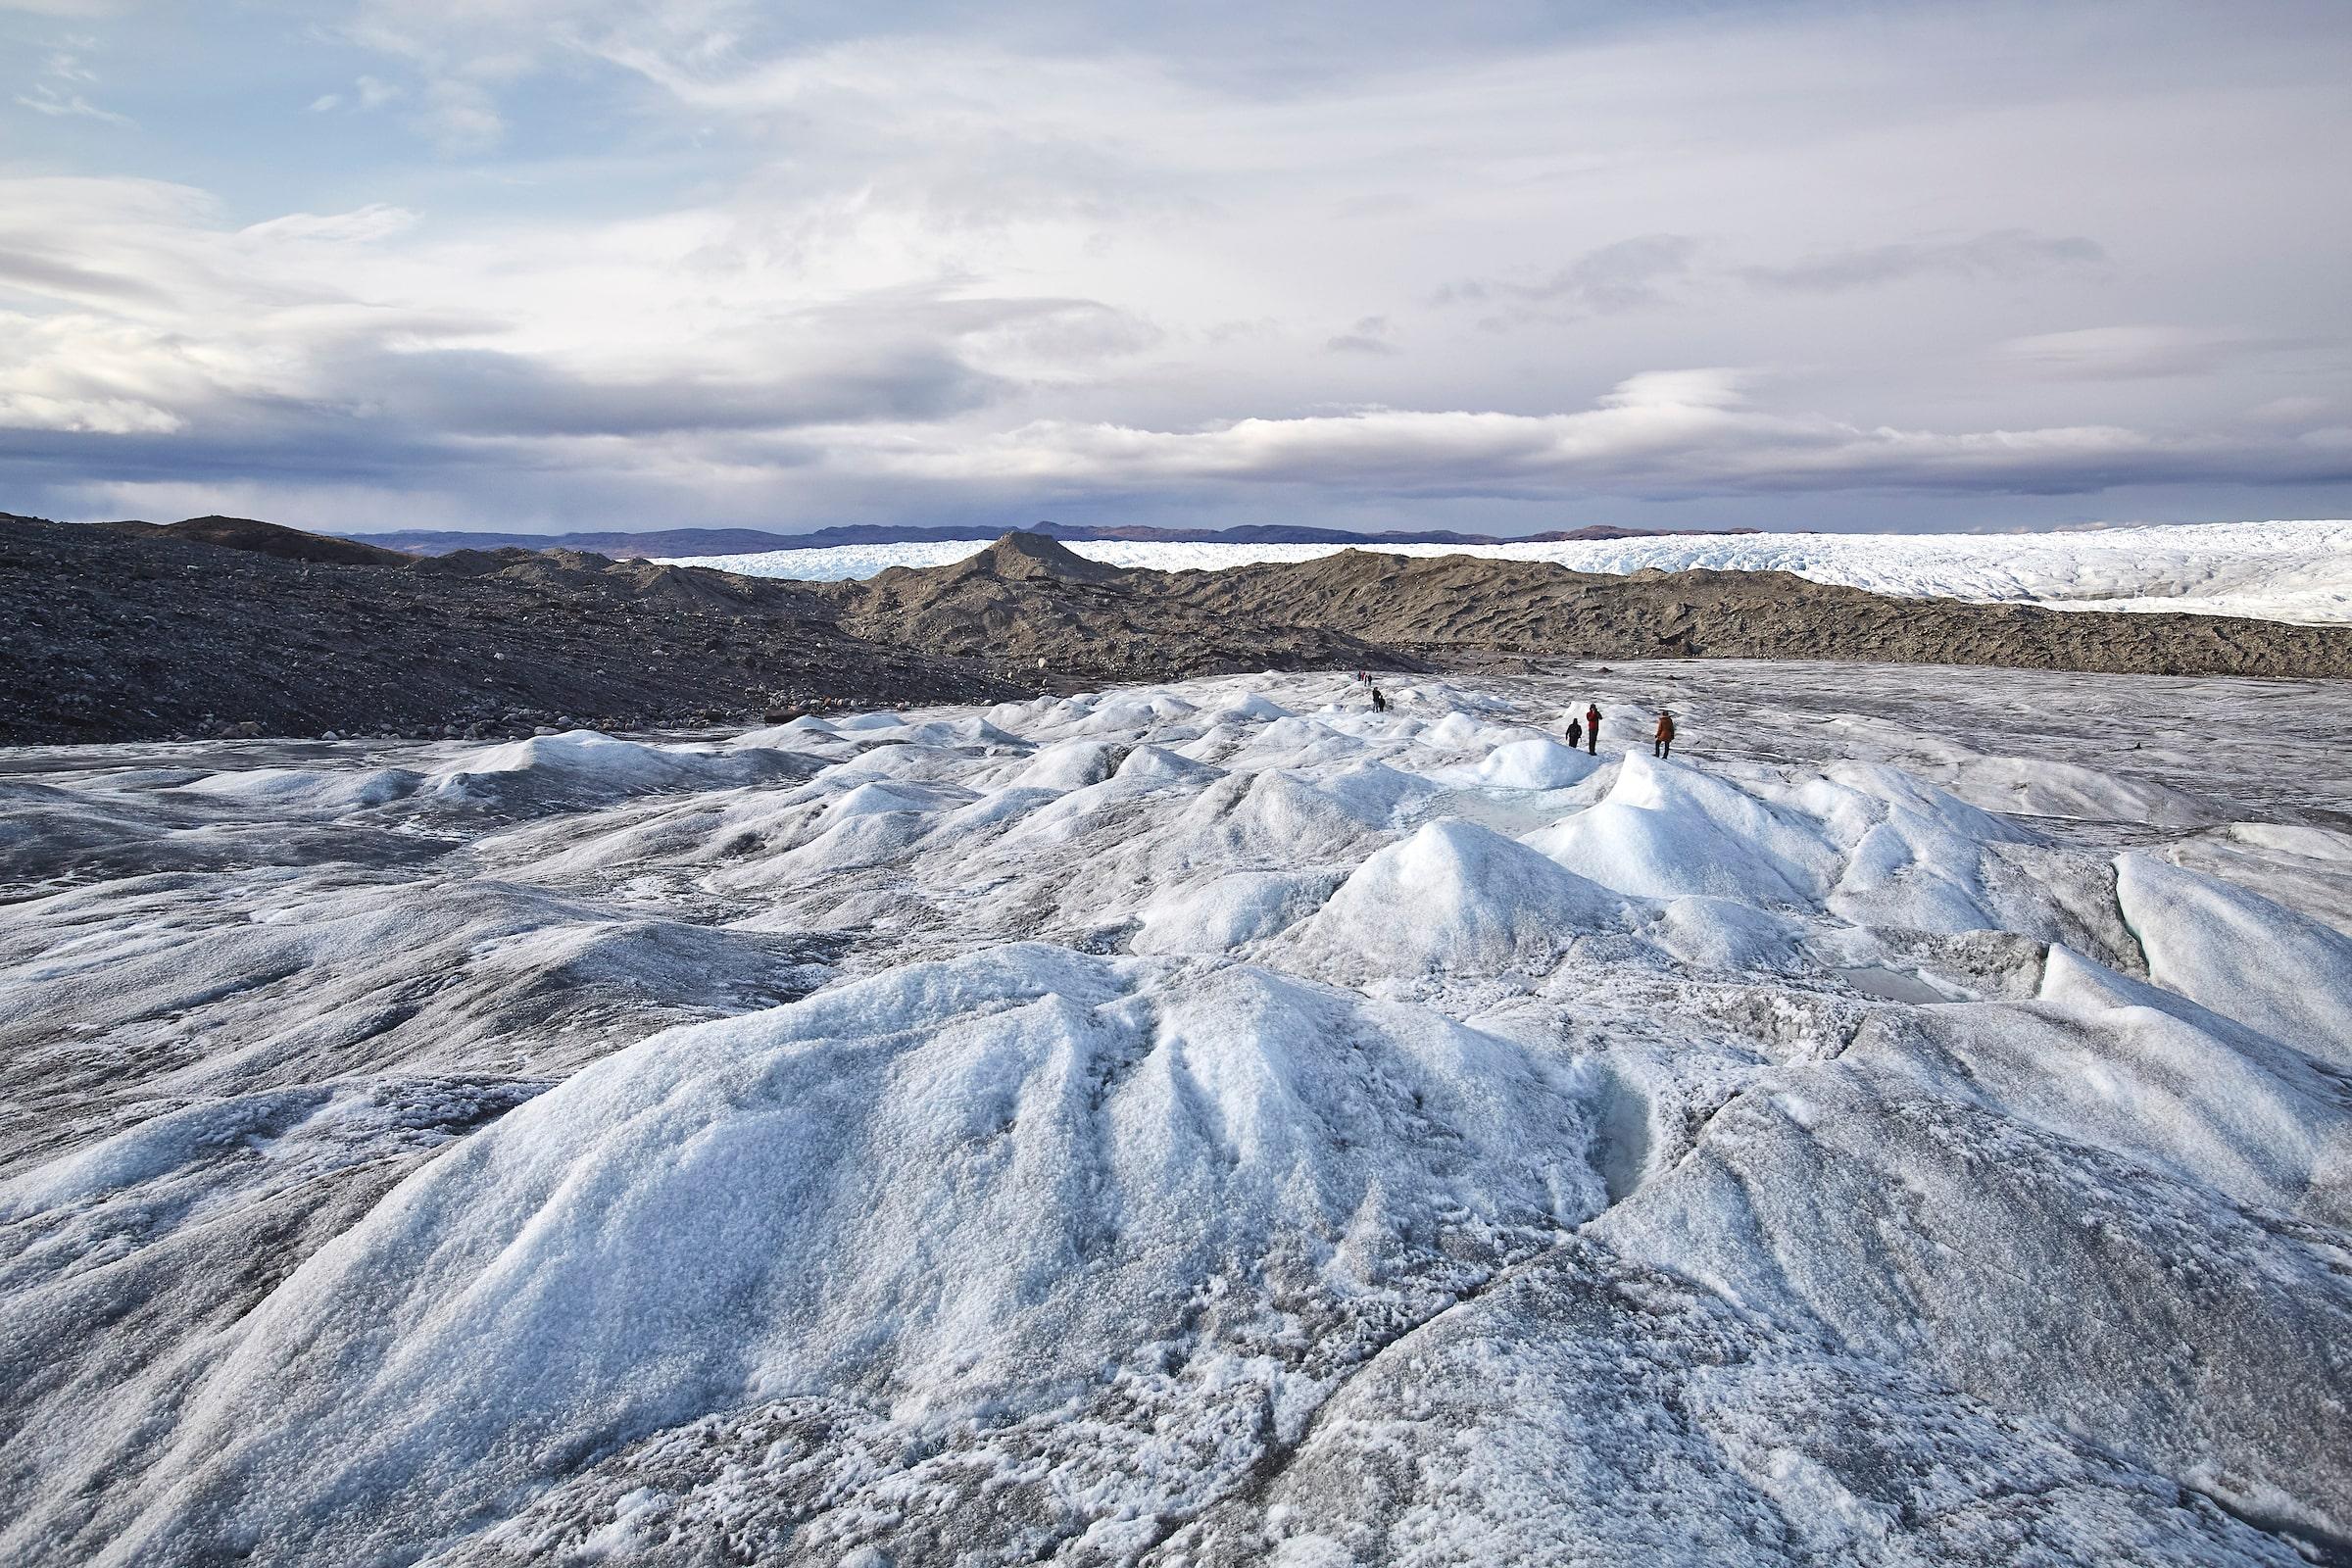 Hikers on top of the ice sheet near Kangerlussuaq. Photo: Peter Lindstrom